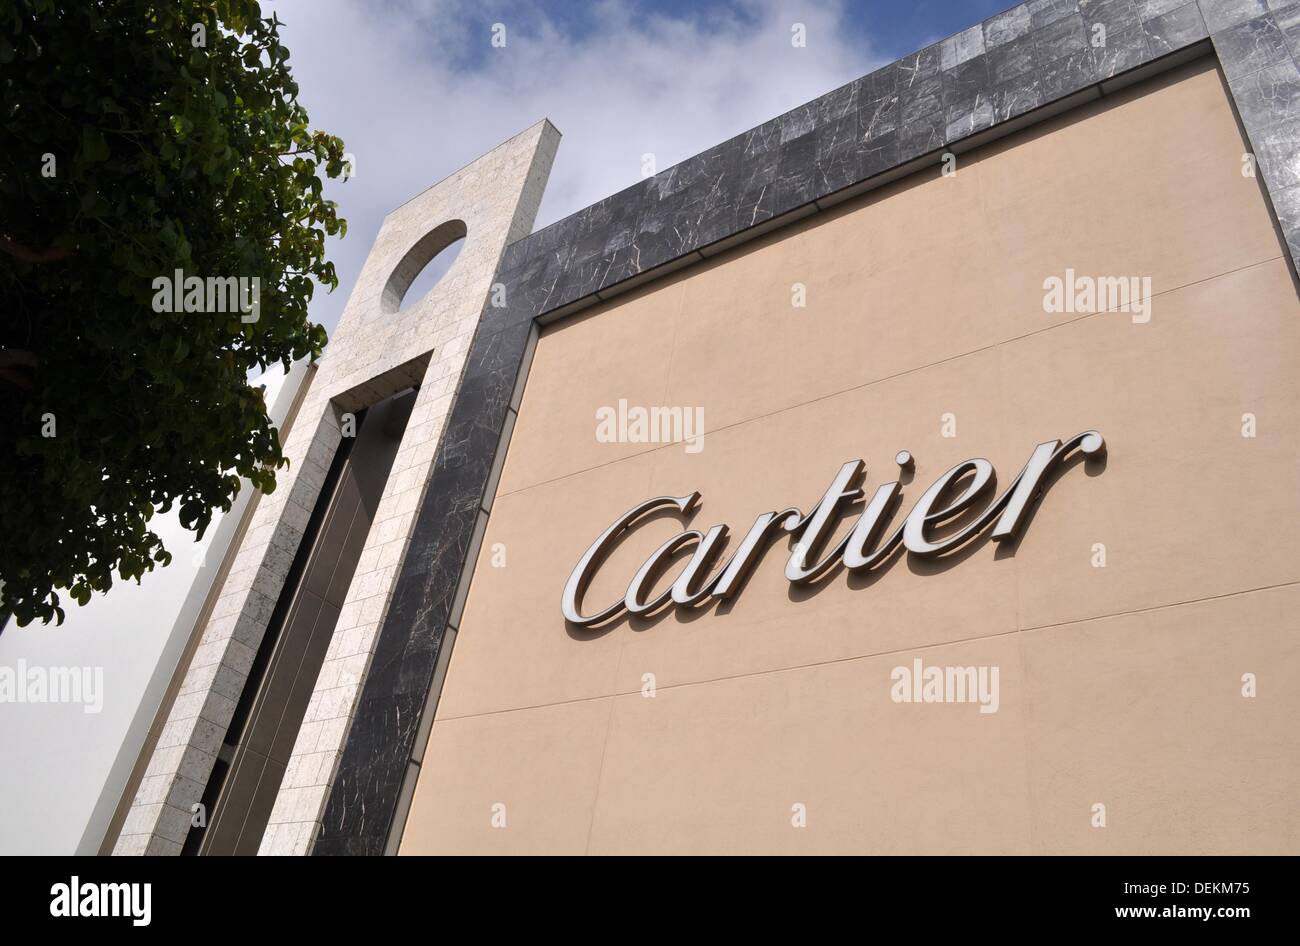 cartier galleria mall phone number